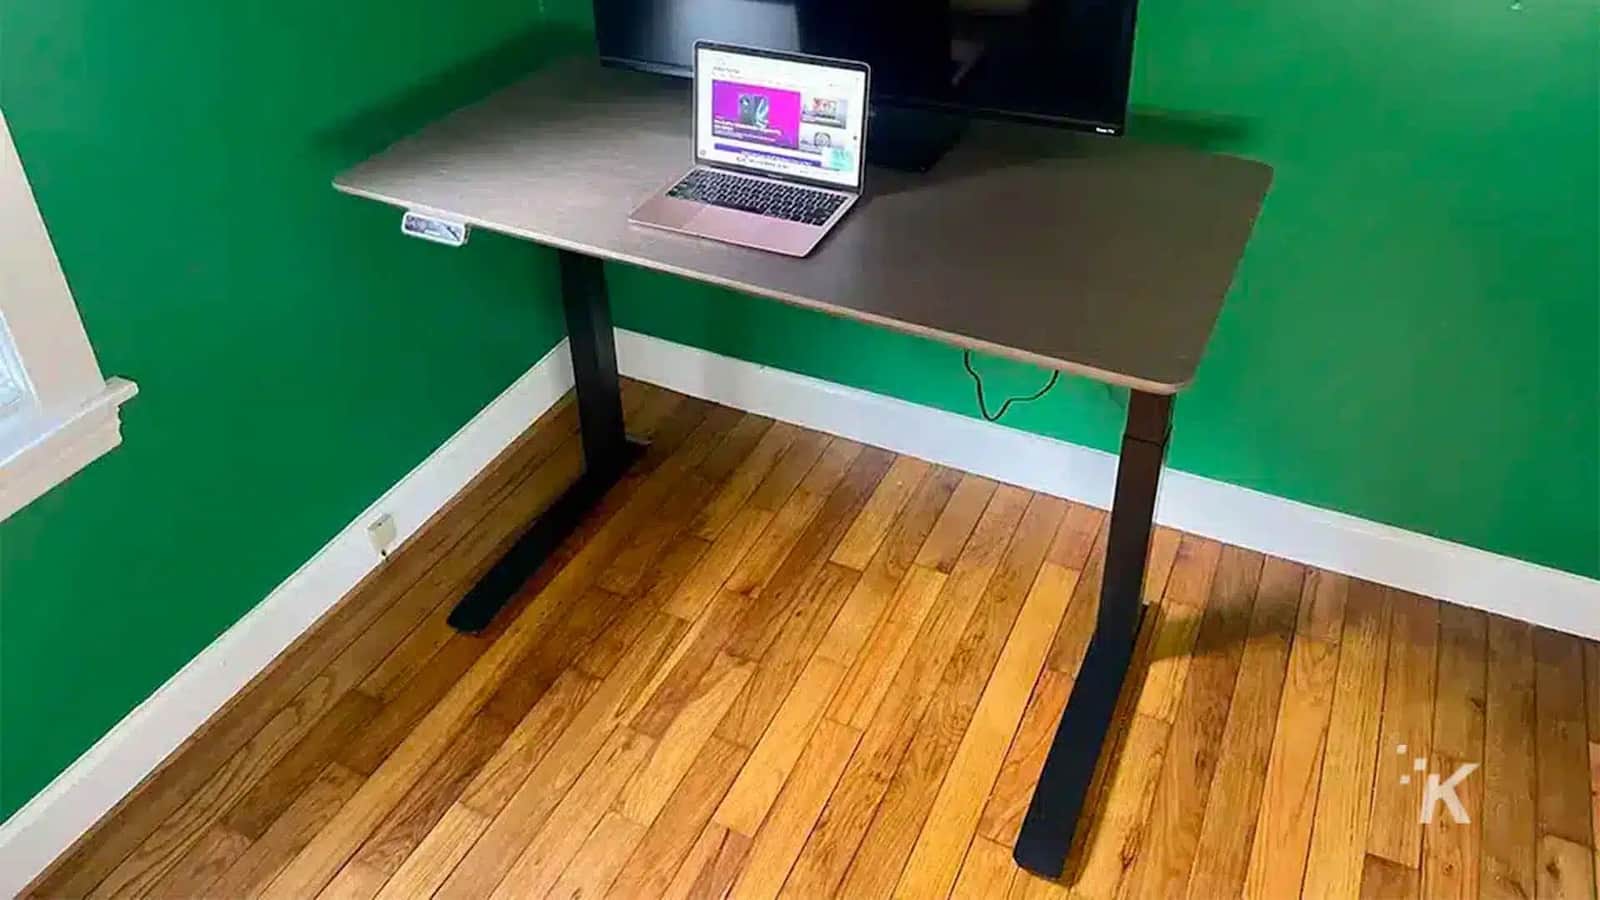 The laptop sits on the table.